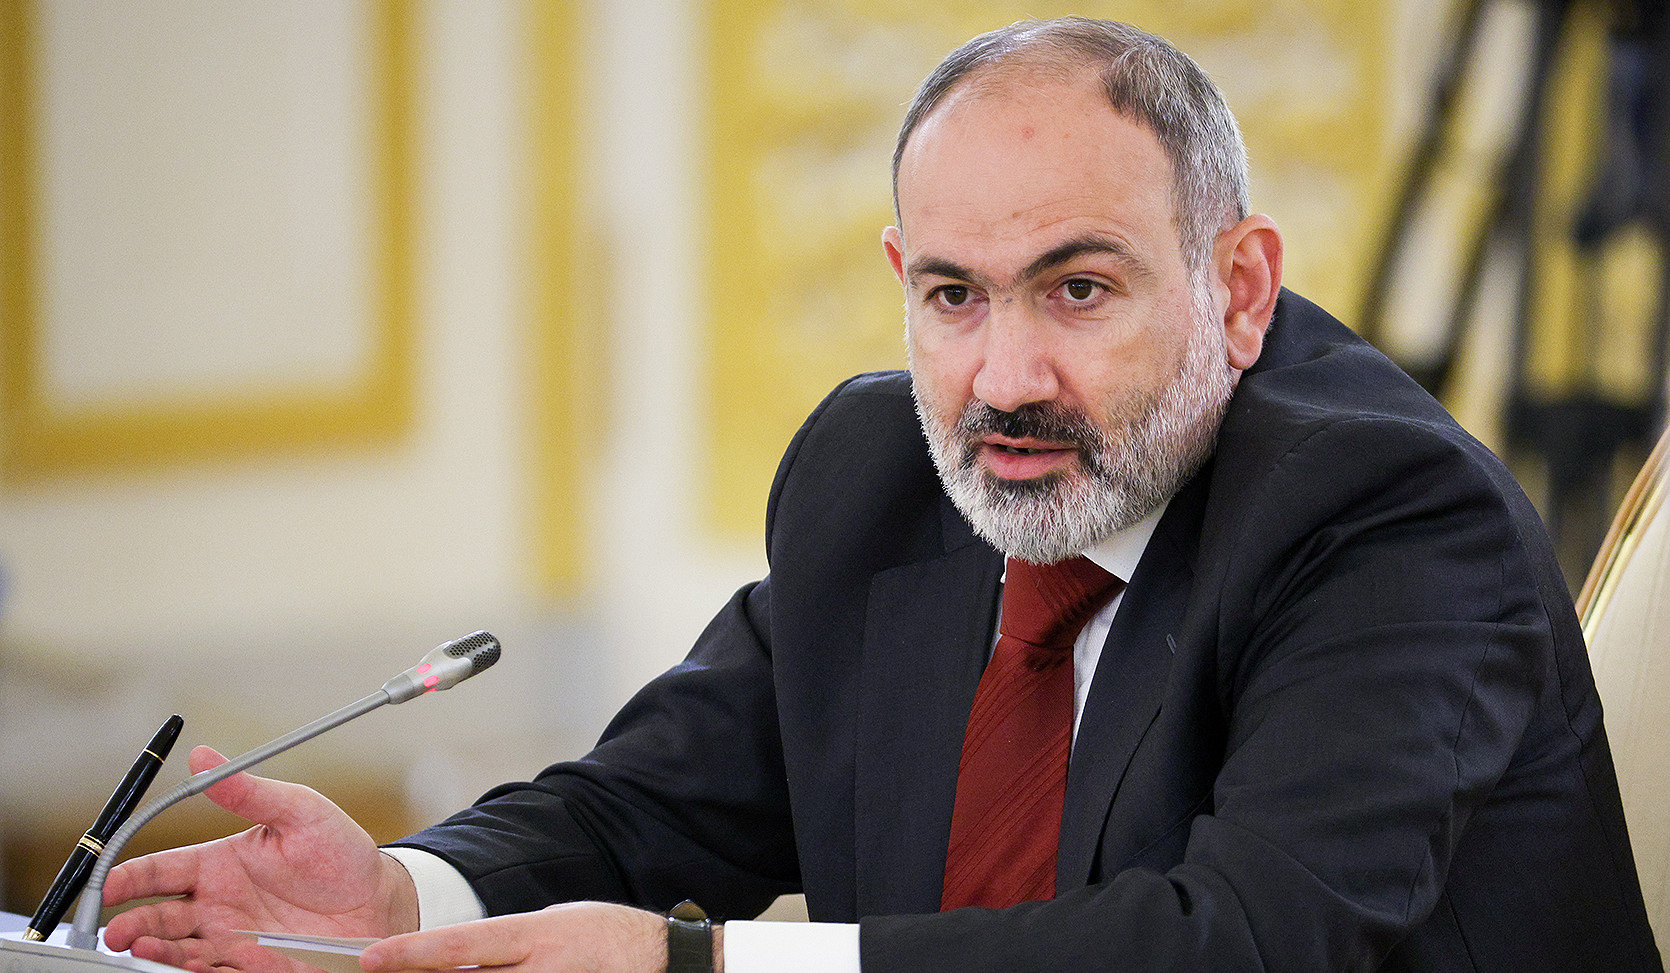 PM Pashinyan participates in meeting of CSTO leaders in Moscow, refers to problems and development prospects of organization in his speech